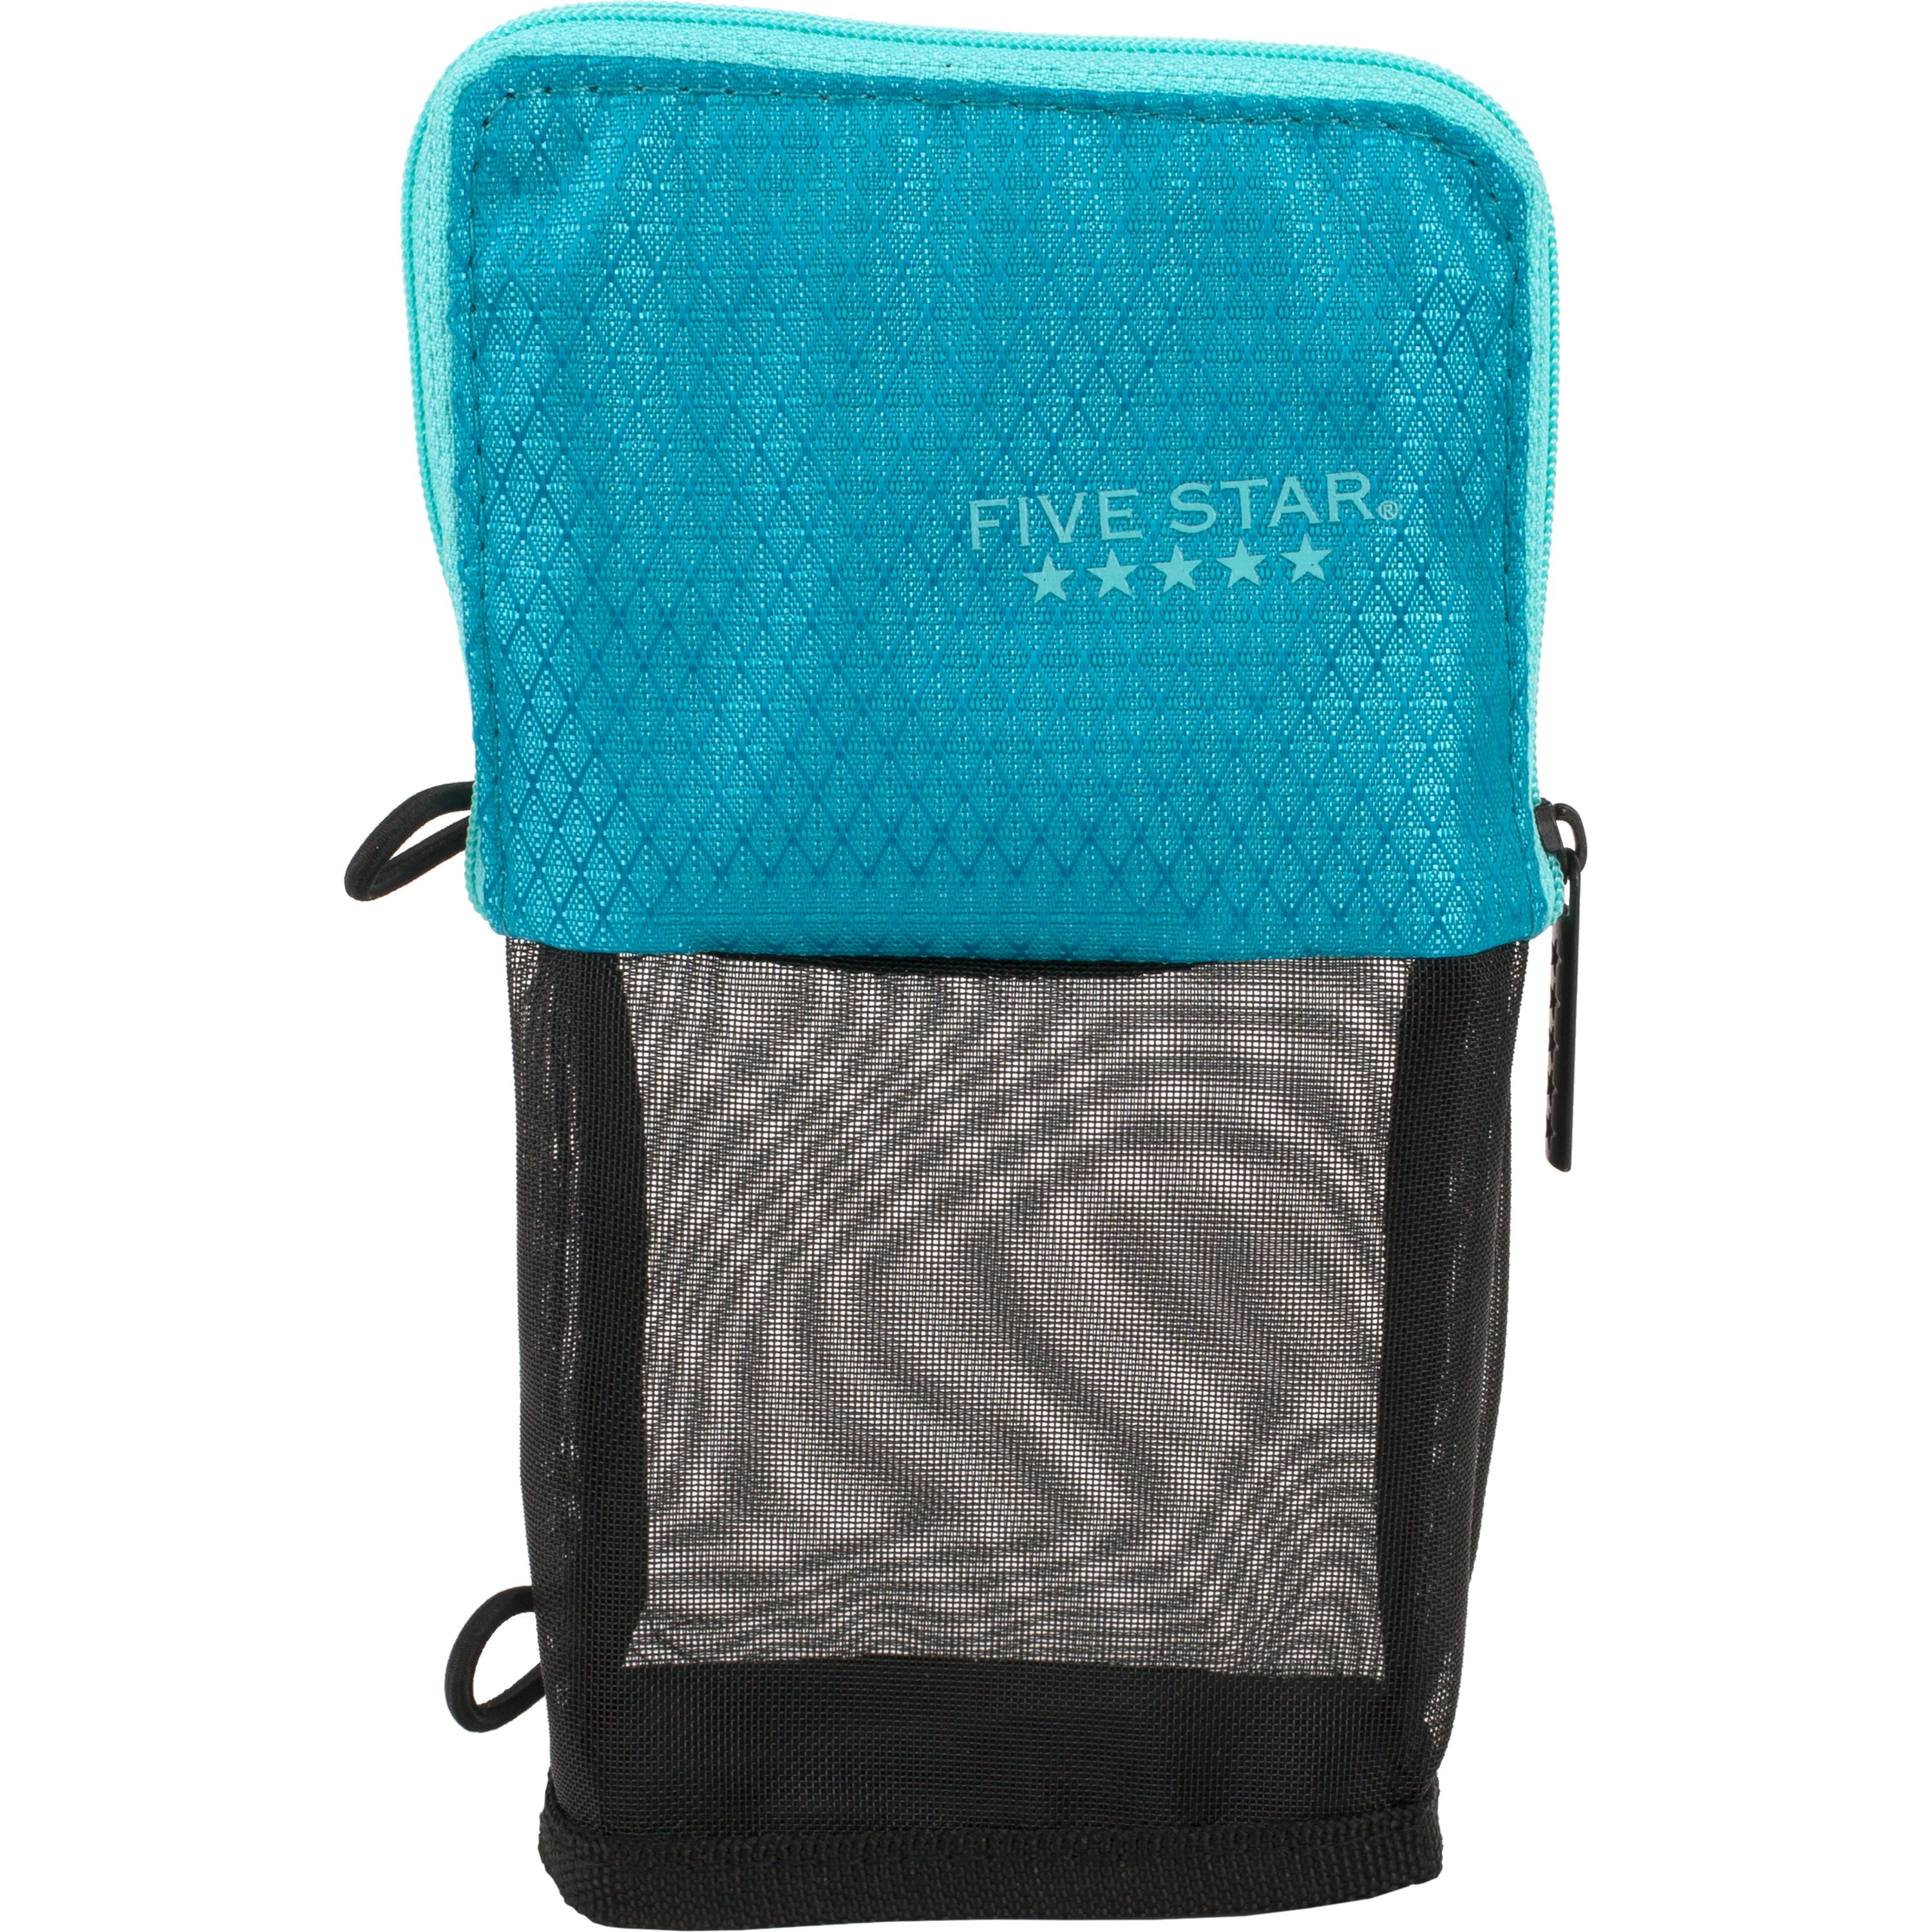 Details about   Mead Five Star Xpanz Carrying Case Pouch For School Supplies Pick your color 